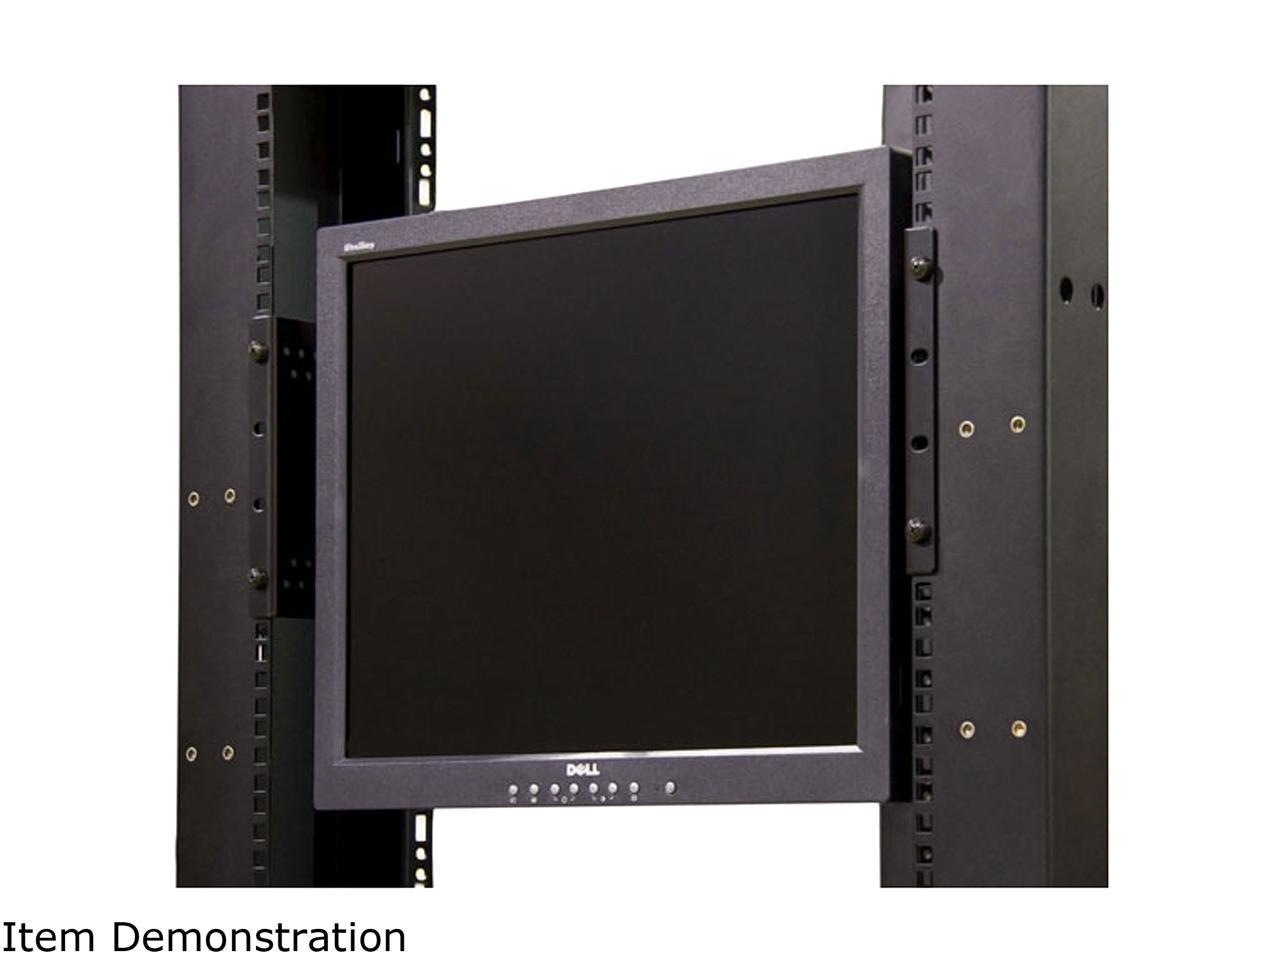 StarTech.com 4U Universal VESA LCD Monitor Mounting Bracket for 19-inch Rack or Cabinet - TAA Compliant - Cold-Pressed Steel Bracket - image 2 of 7